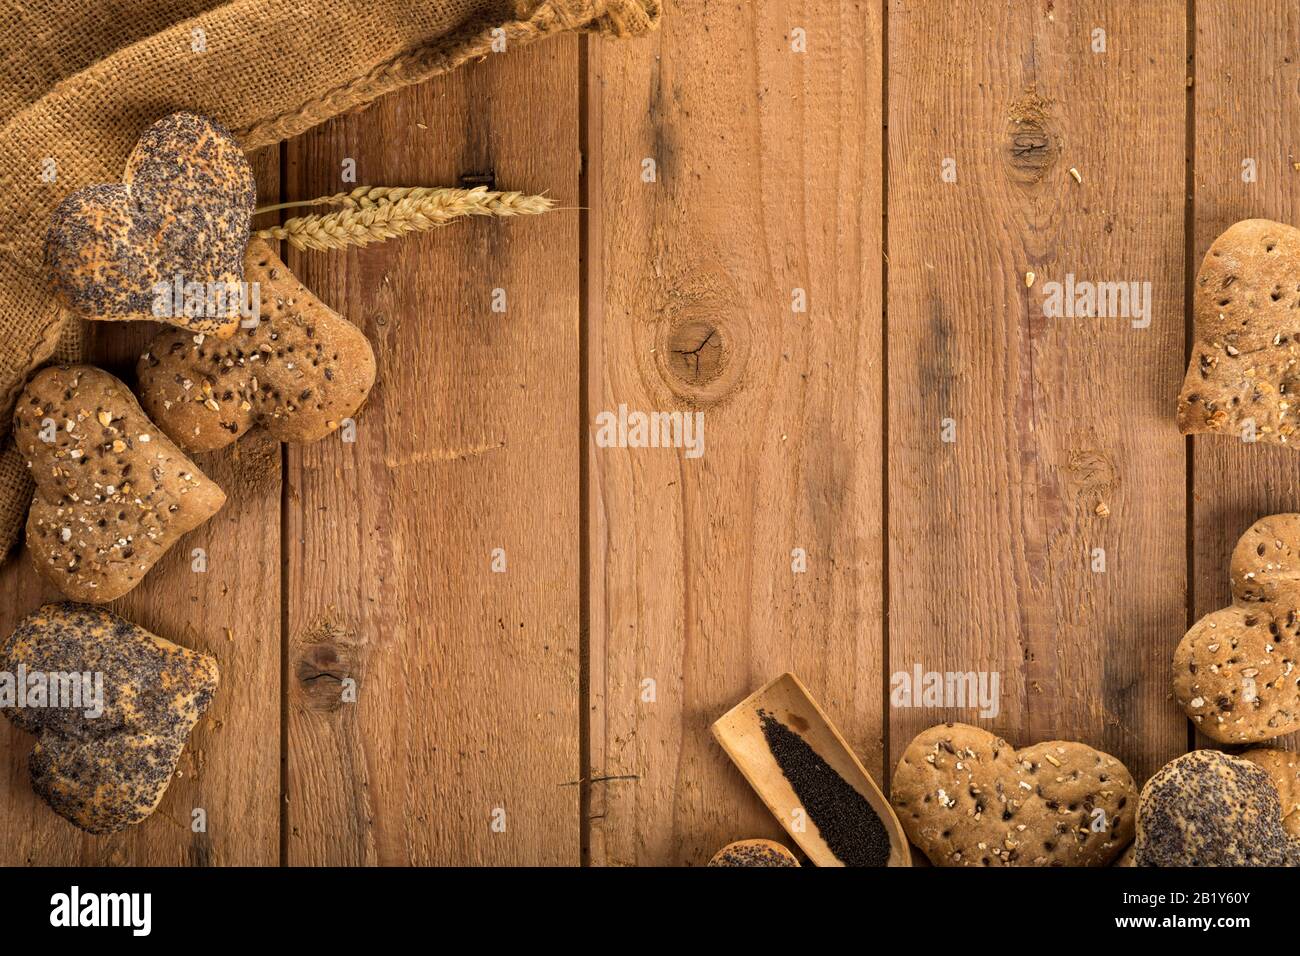 Background with heart shaped buns, grains and seeds on rustic wooden planks, large copy space Stock Photo